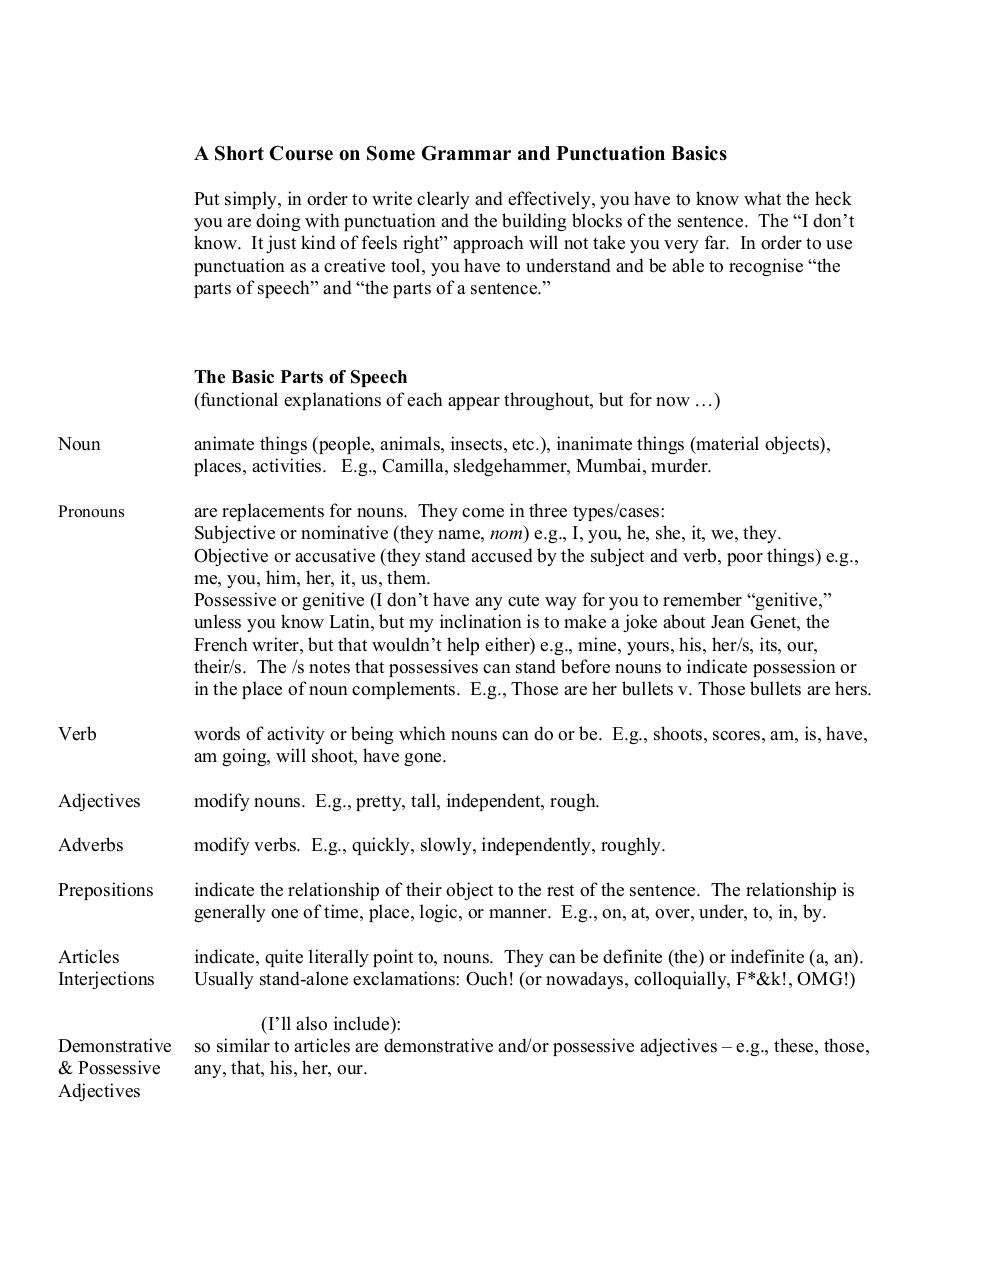 A Short Course on Some Grammar Basics.pdf - page 1/22